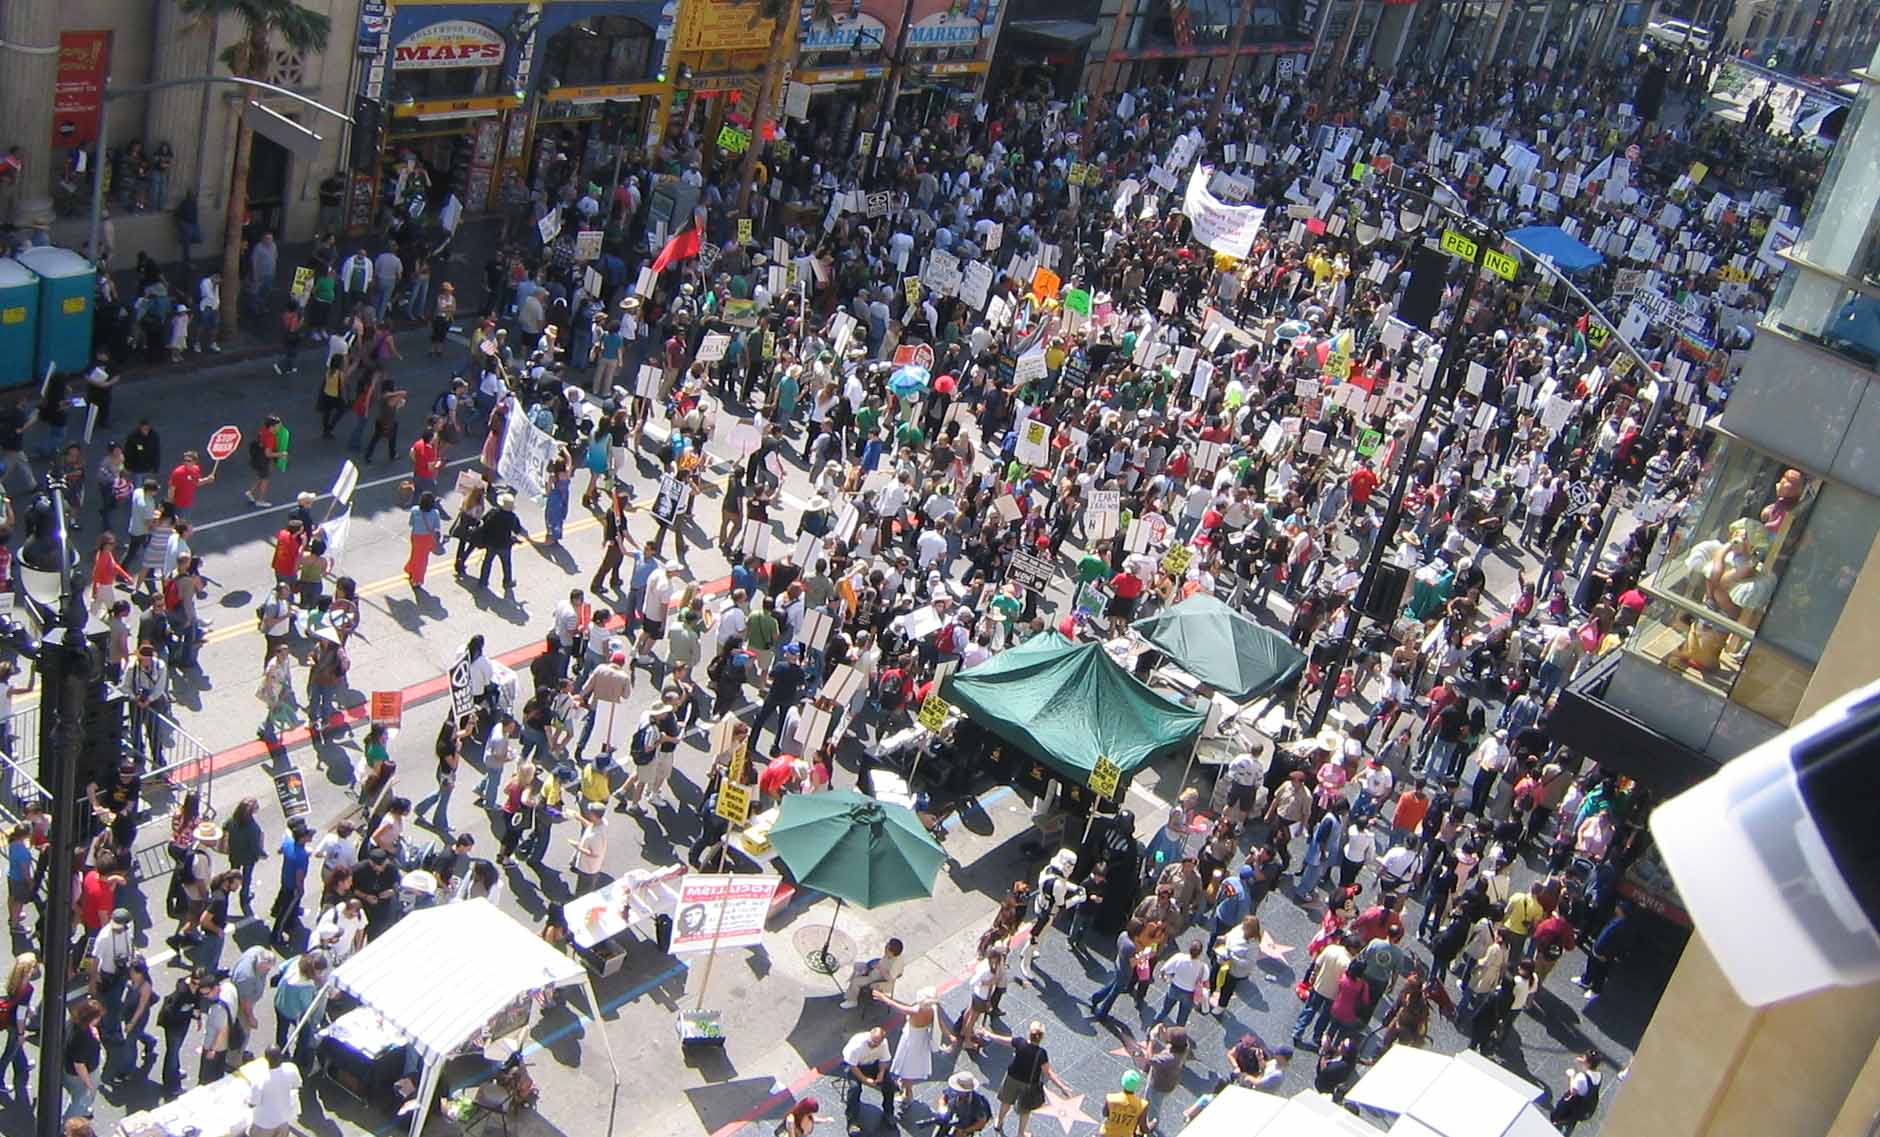 Iraq Invasion AntiWar March in Los Angeles March 17 2007